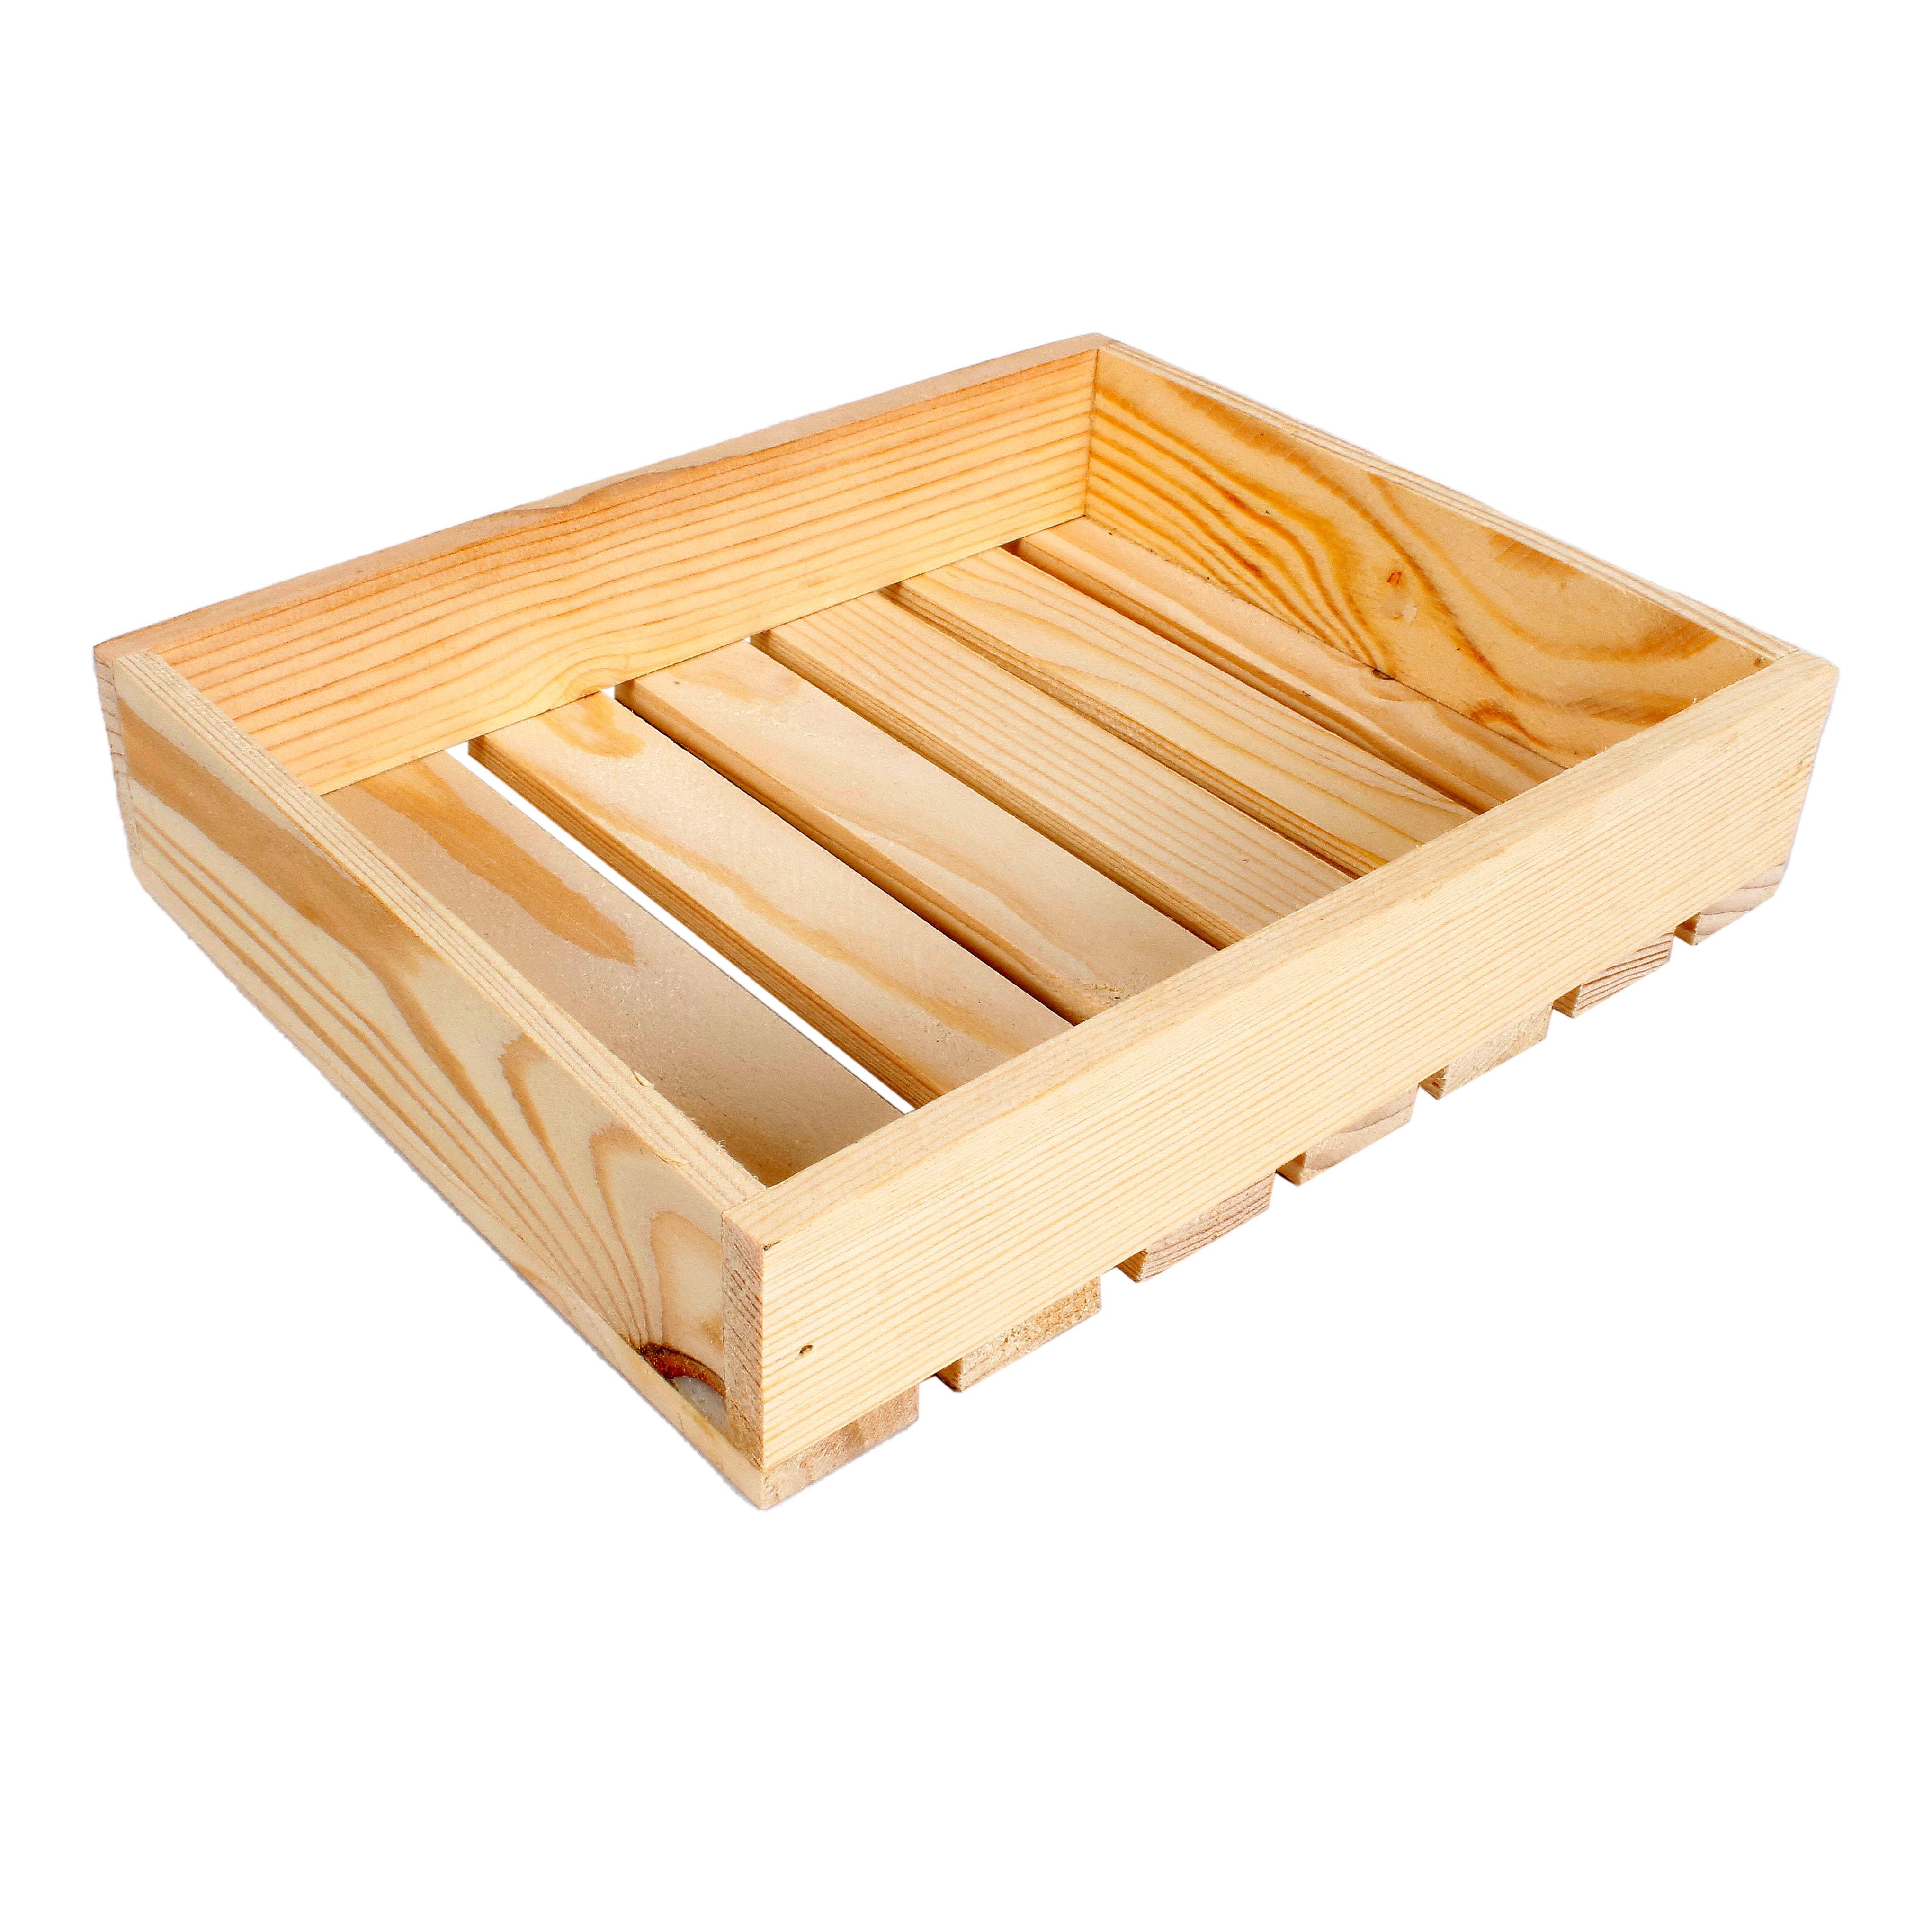 Wooden Multipurpose Slotted Serving Tray 8 X 10 X 2Inch 1Pc Ib